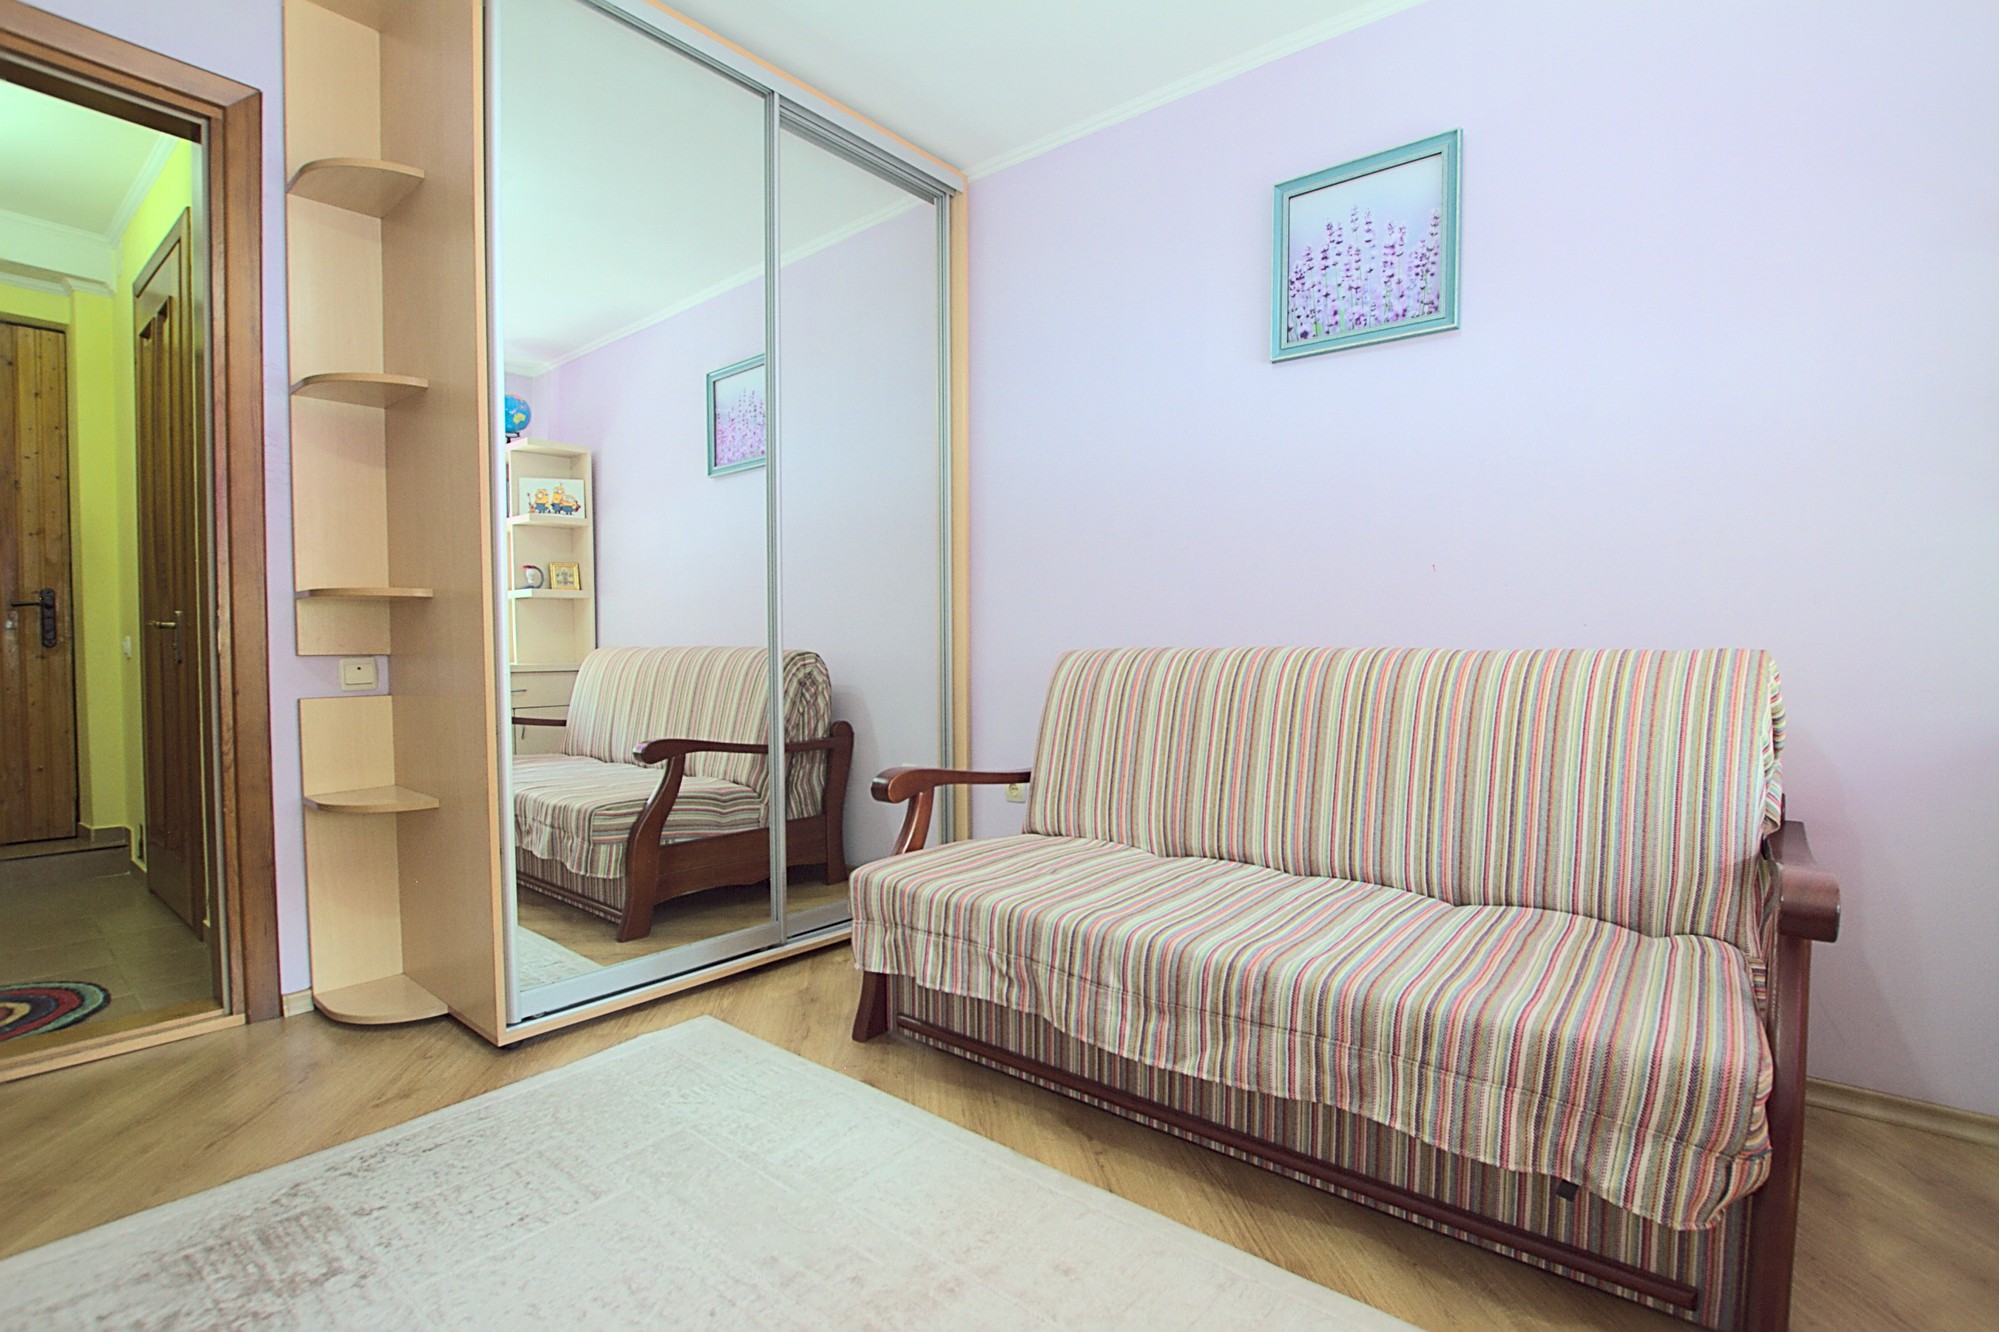 Lavender Apartment  is a 2 rooms apartment for rent in Chisinau, Moldova